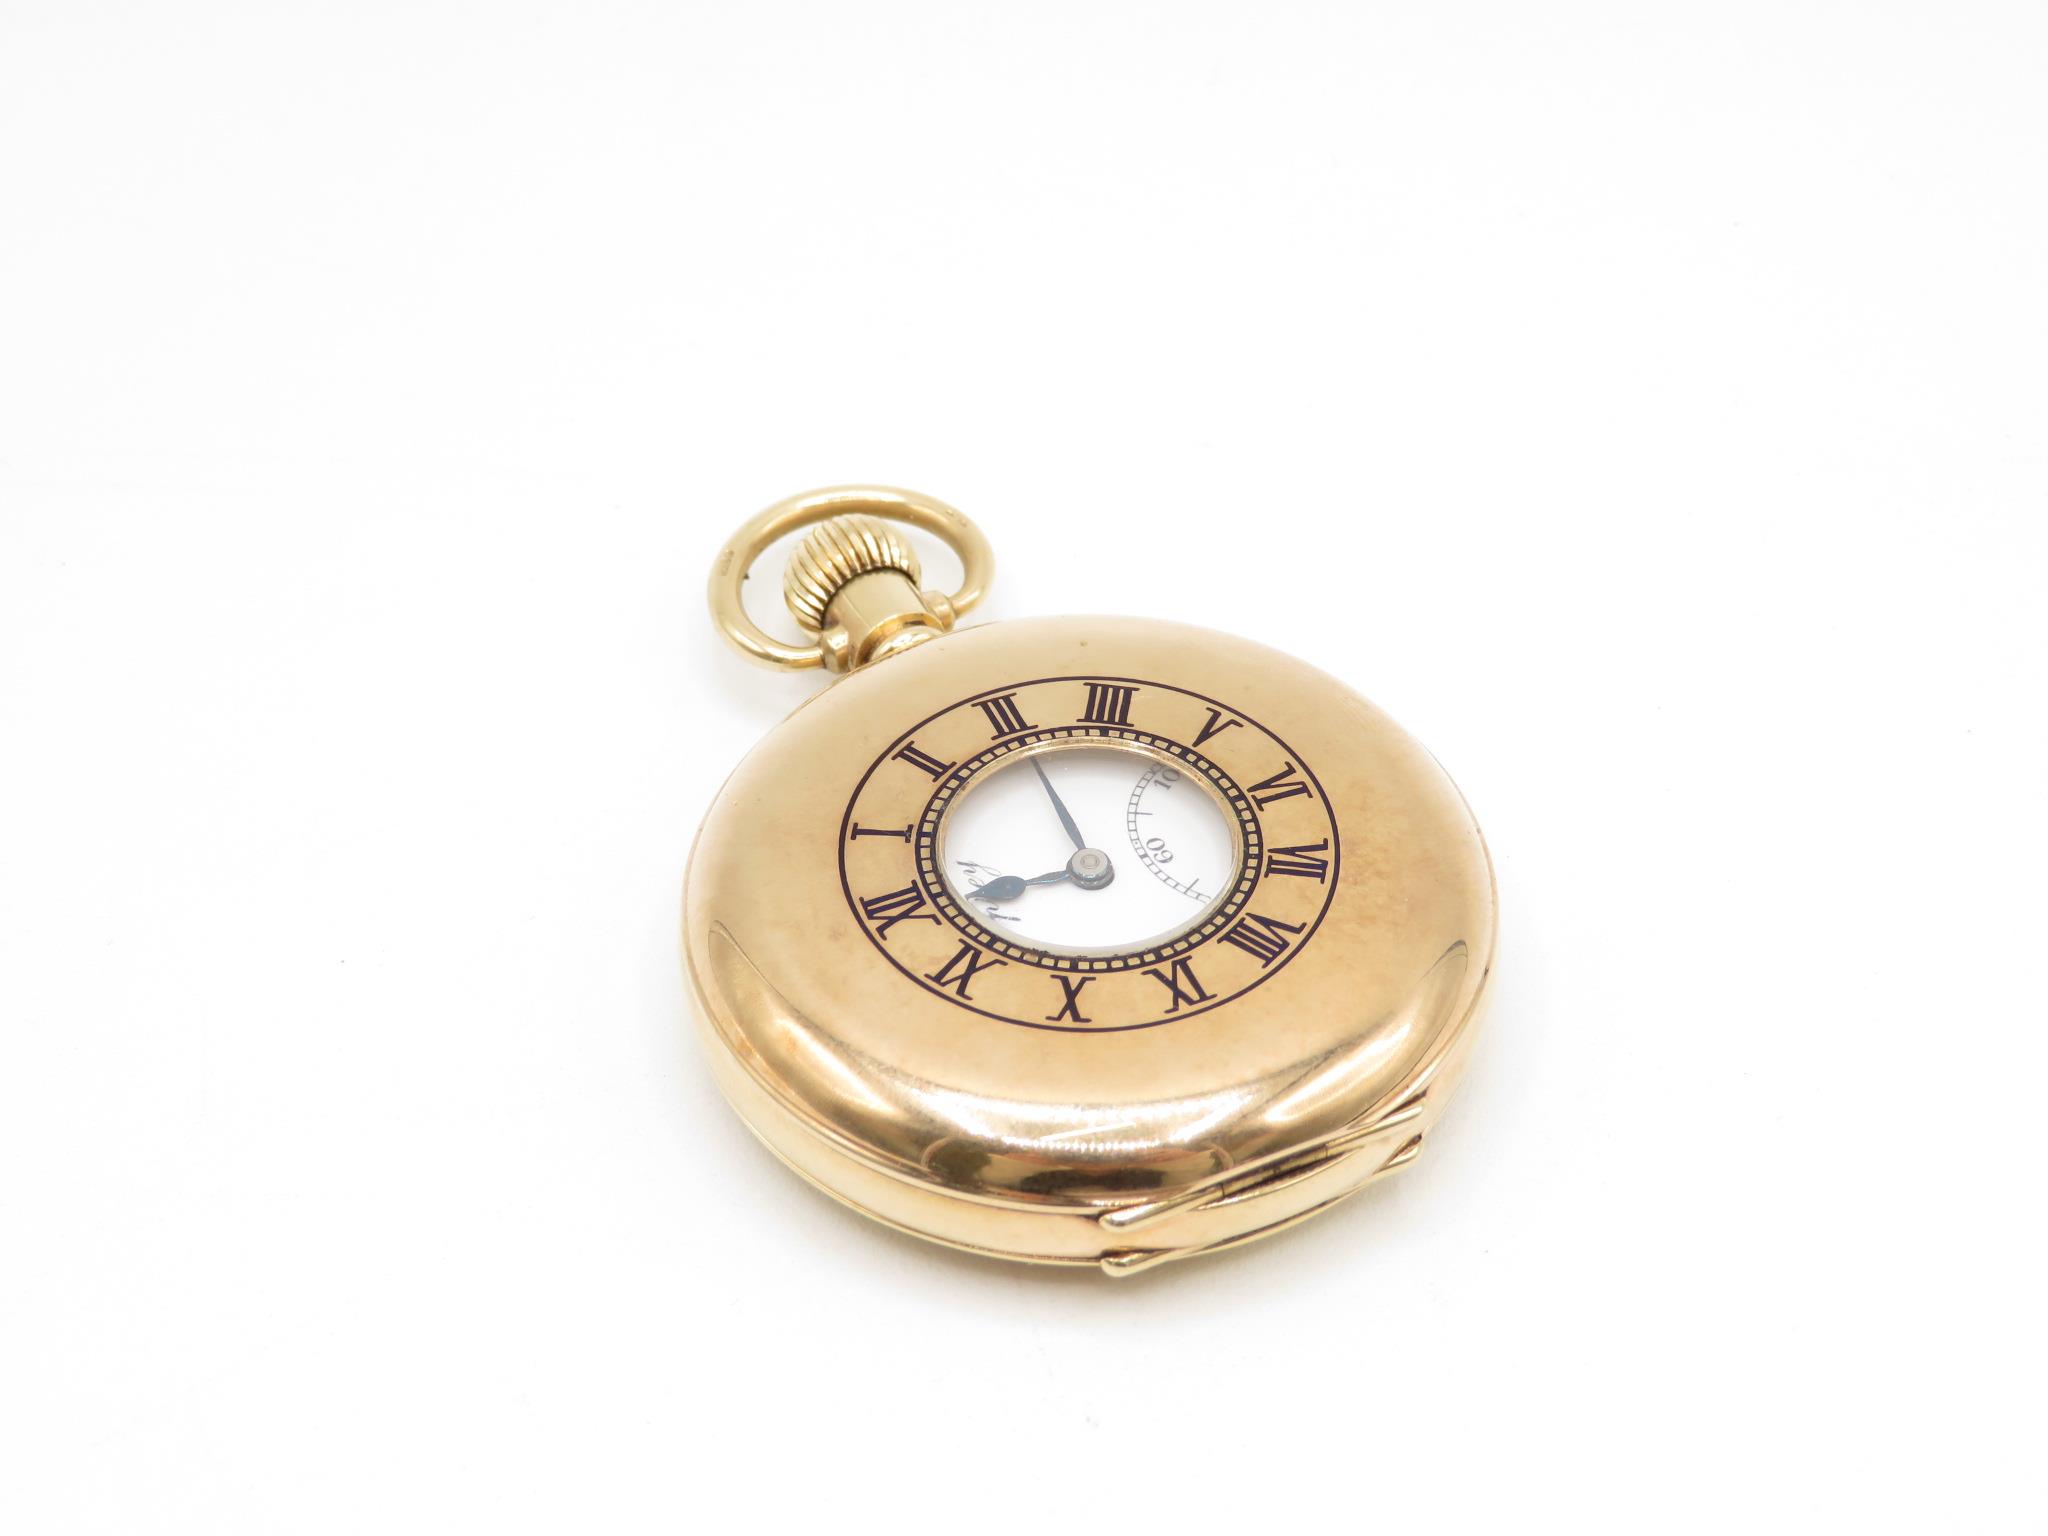 9ct gold gent's pocket watch by Vertex for Asprey signed 50 years loyal service J Summers and Sons - Image 2 of 9